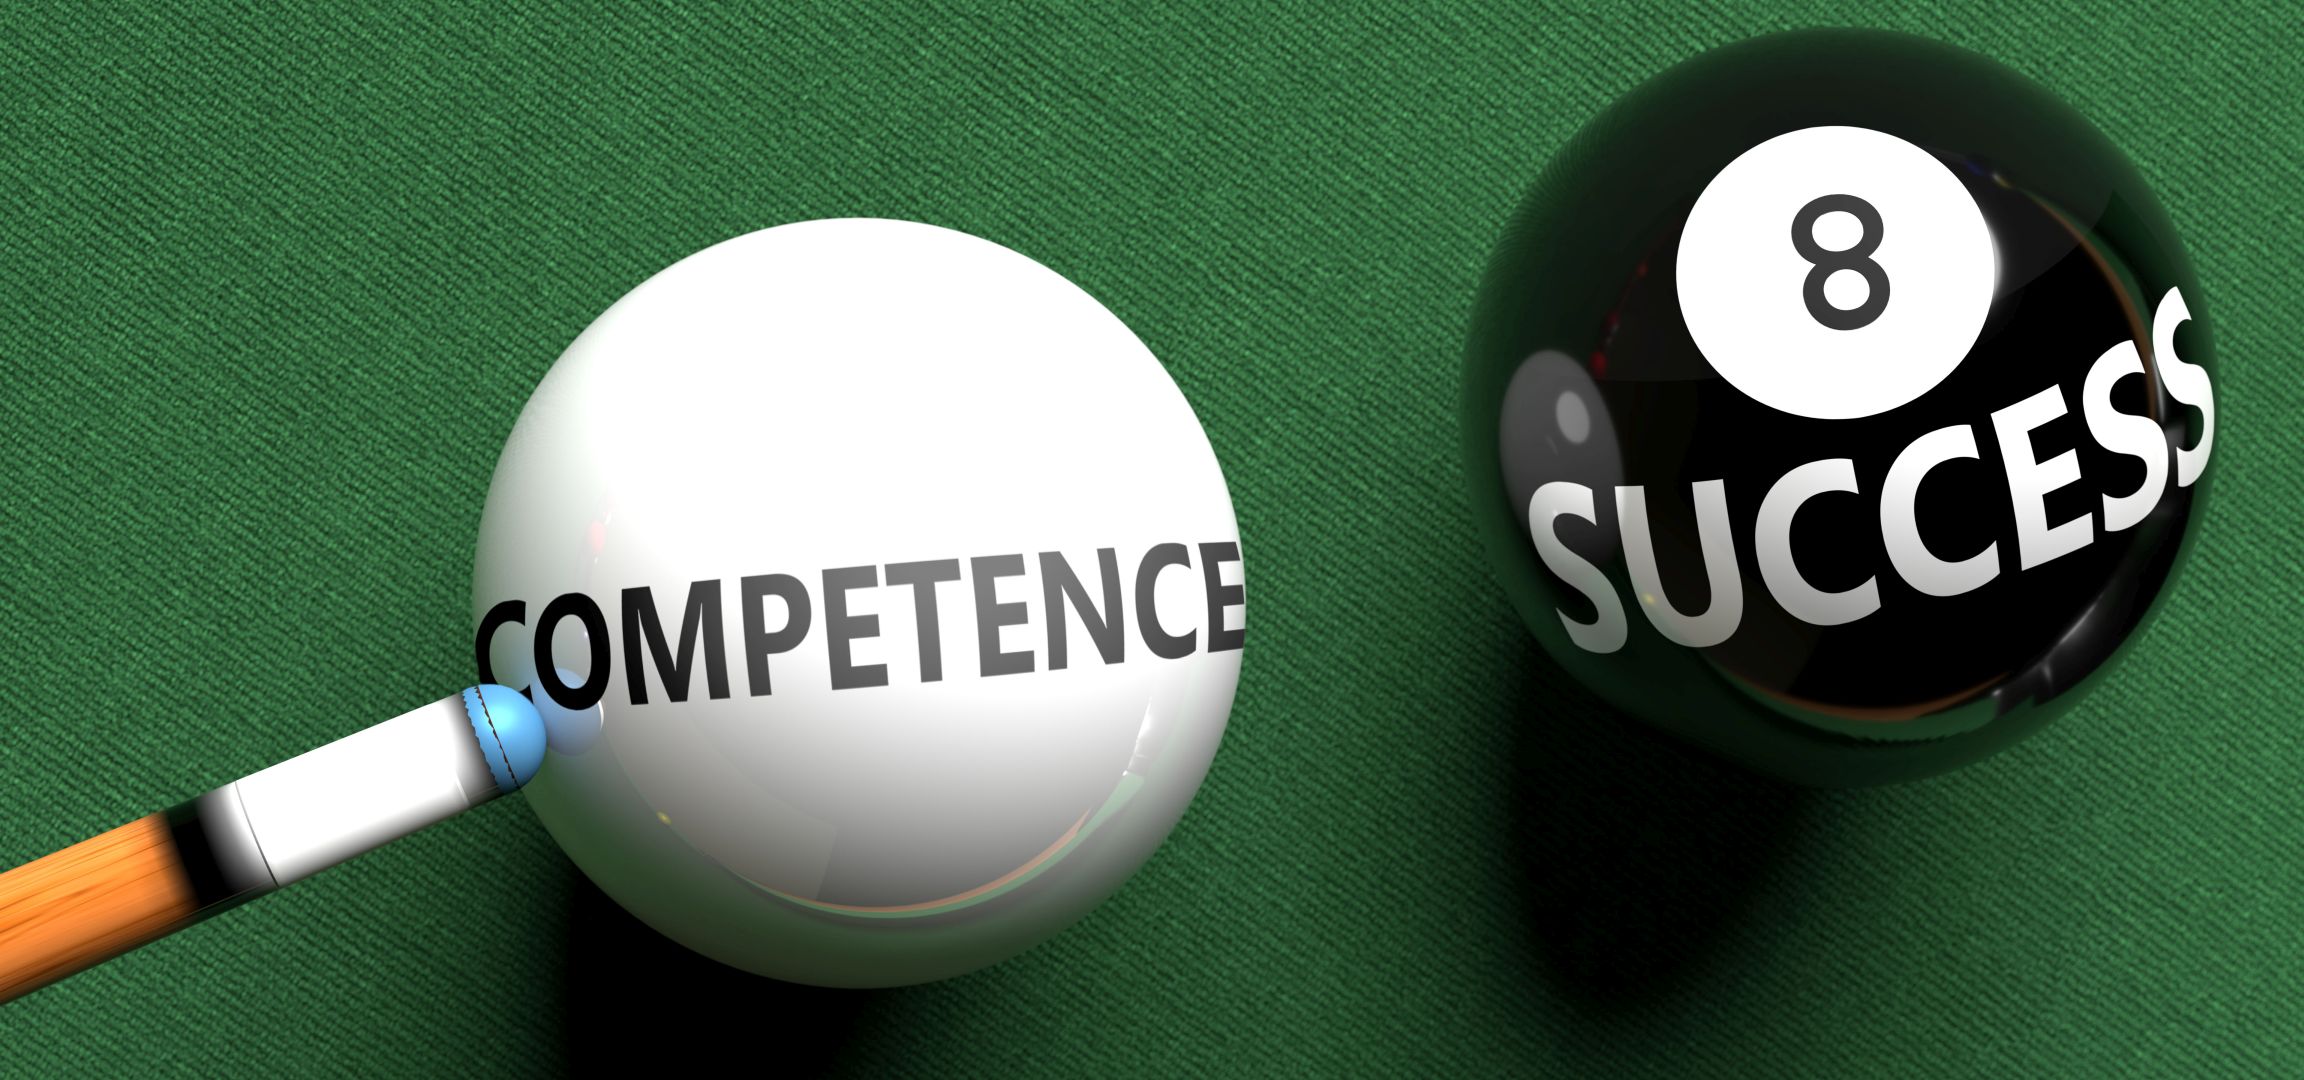 Competence brings success - pictured as word Competence on a pool ball, to symbolize that Competence can initiate success, 3d illustration